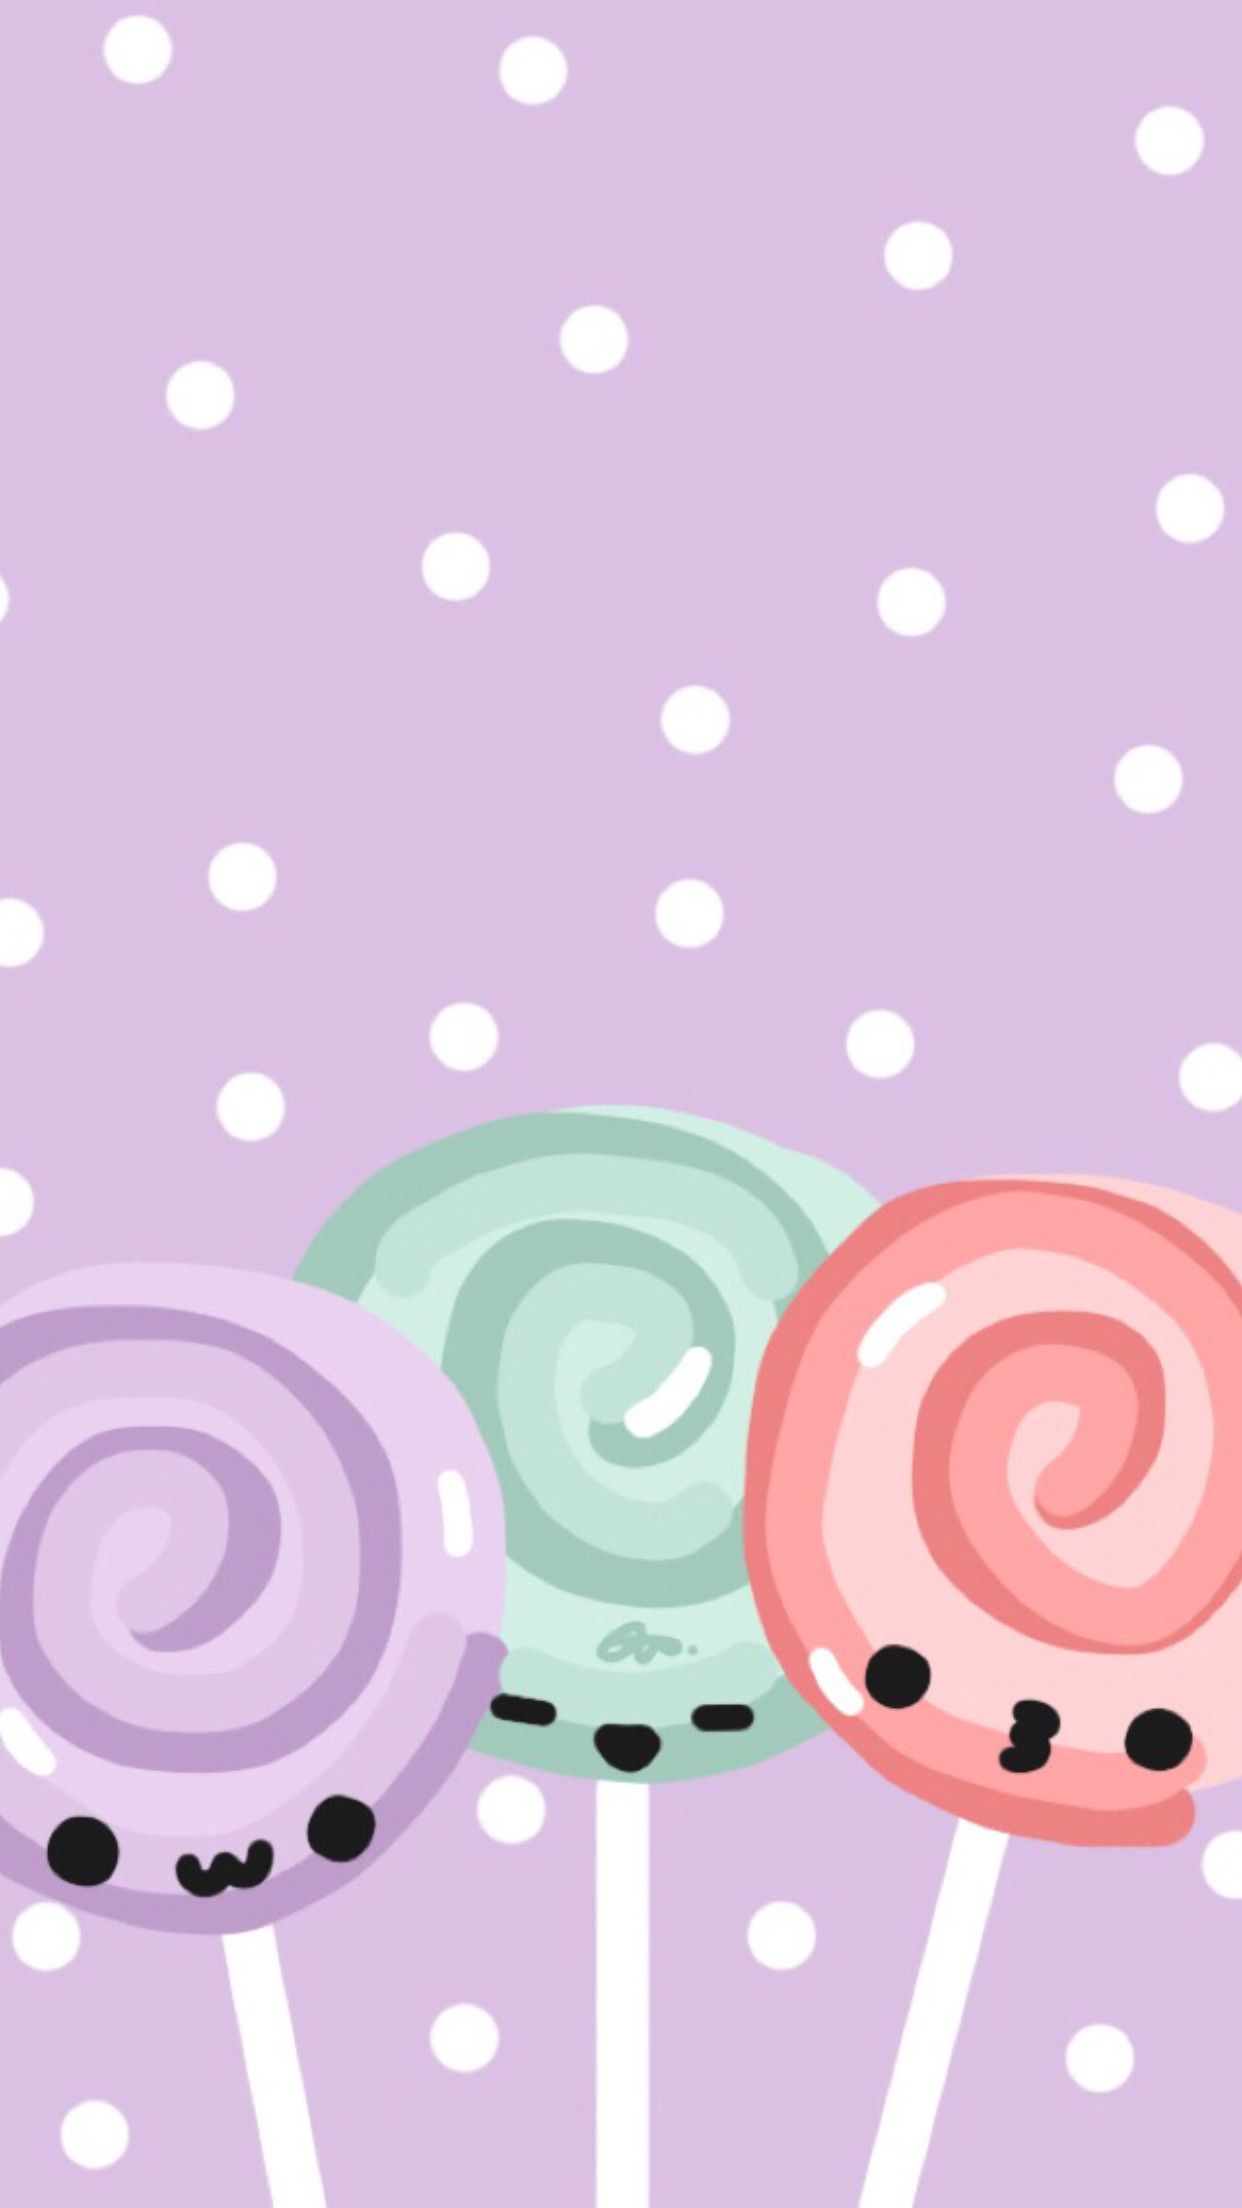 Cute Wallpaper for Phone Background - 2.5